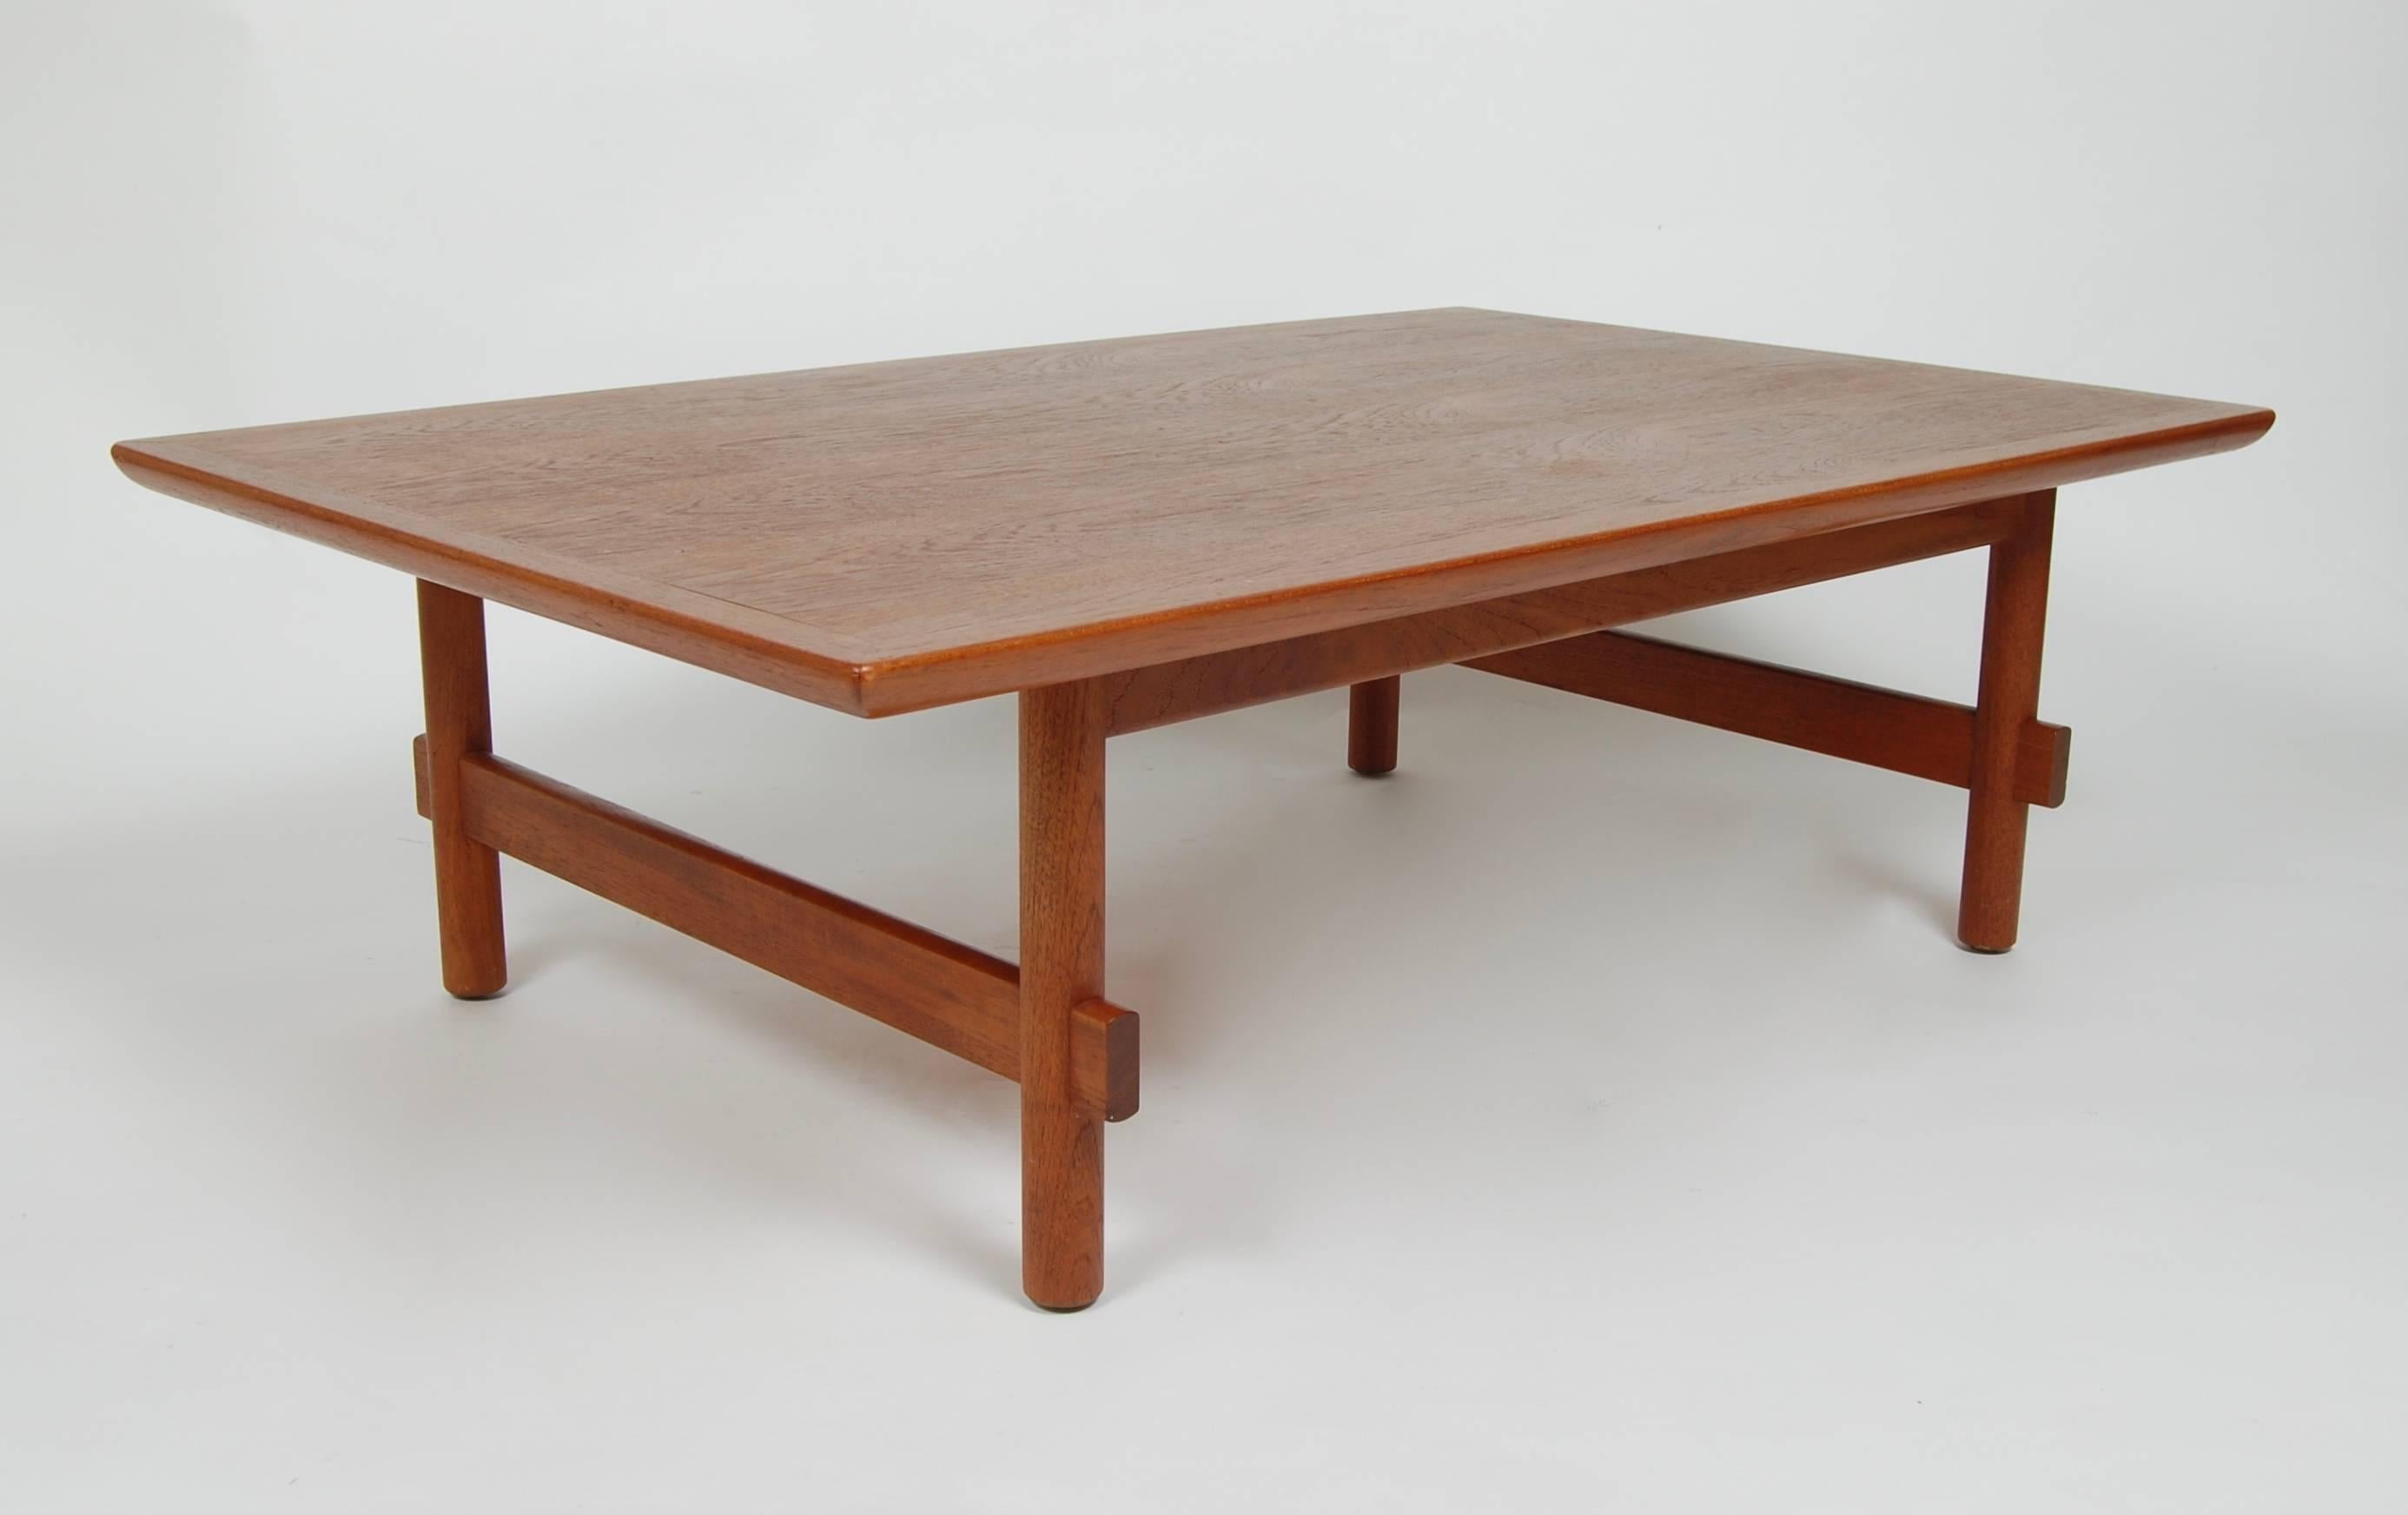 1960s rectilinear teak coffee table from Japan, clean simple and sleek lines with expressive bookmatched grain patterns to the top.